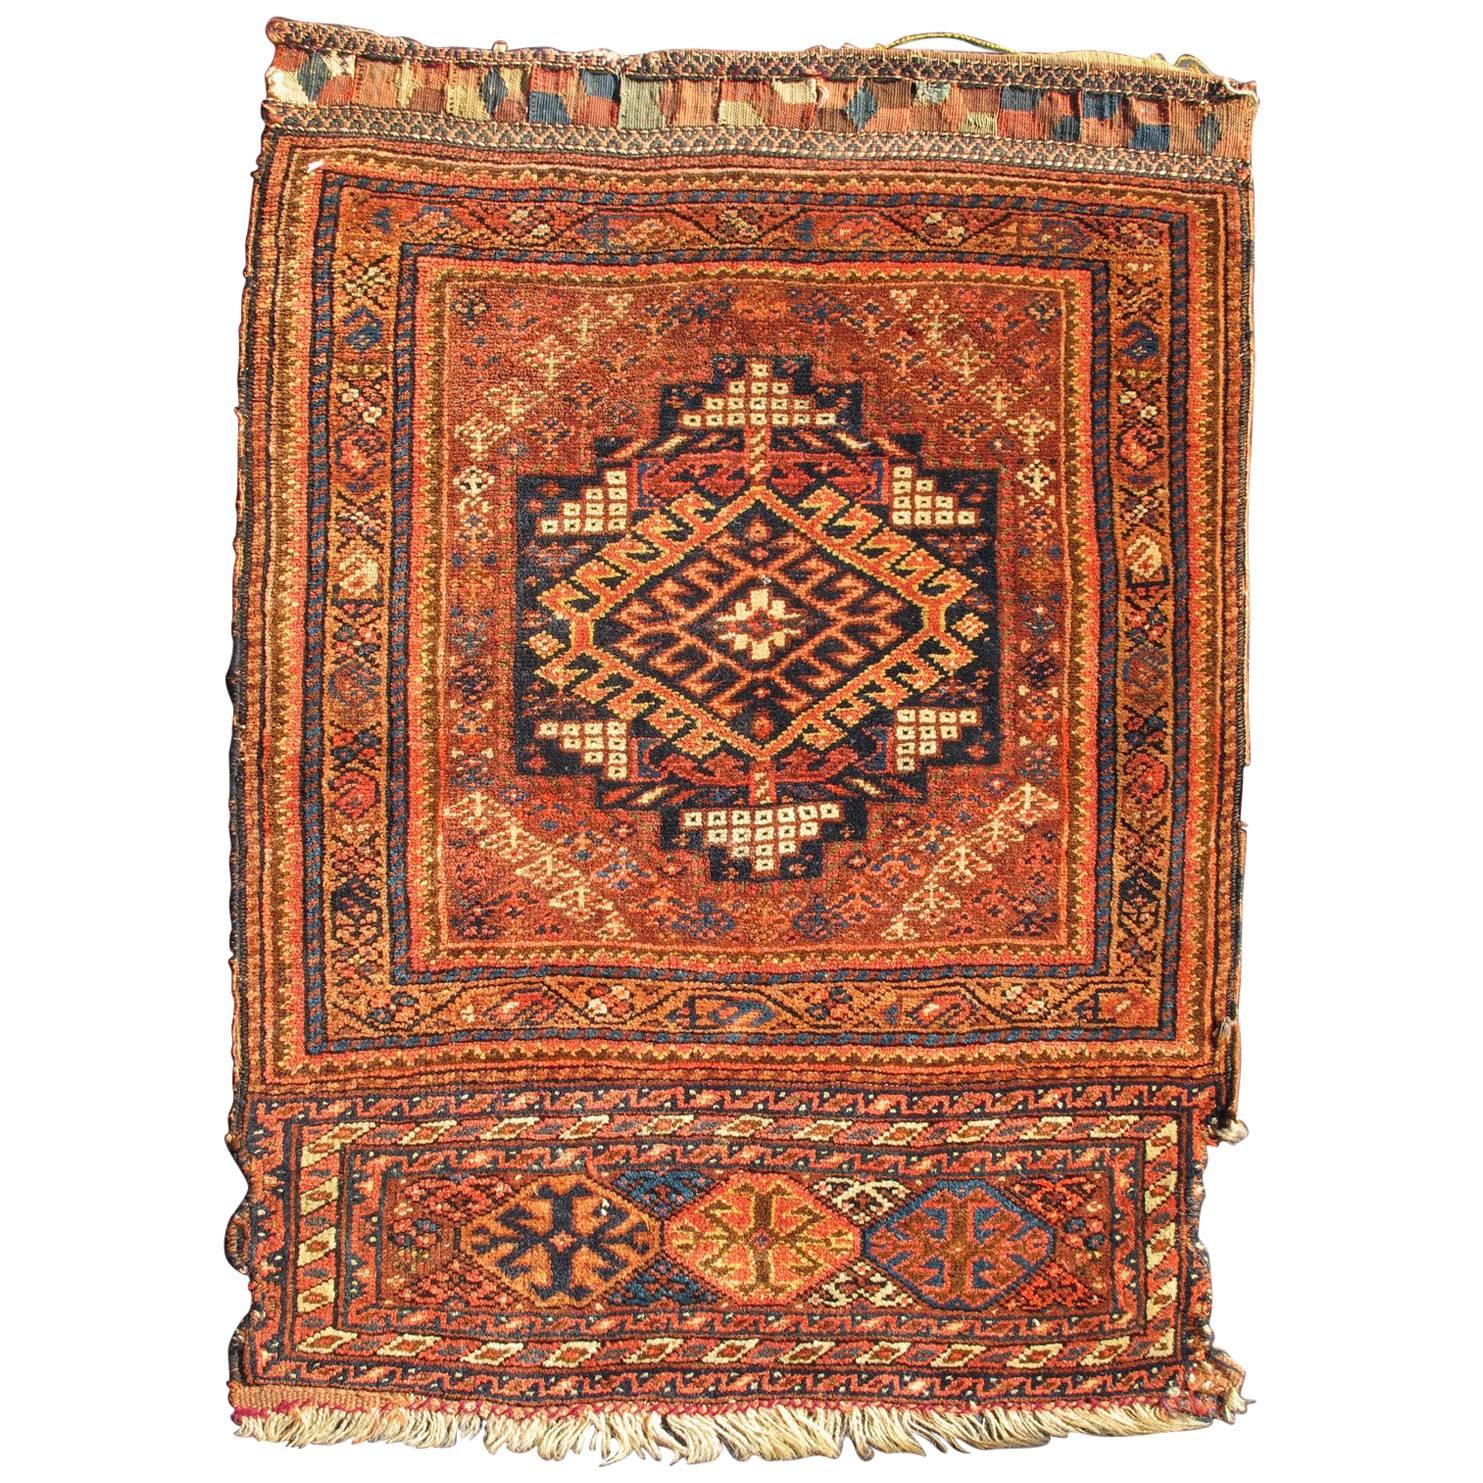 Antique Persian Two-Panel Qashqai Rug with Medallion Design in Orange and Brown